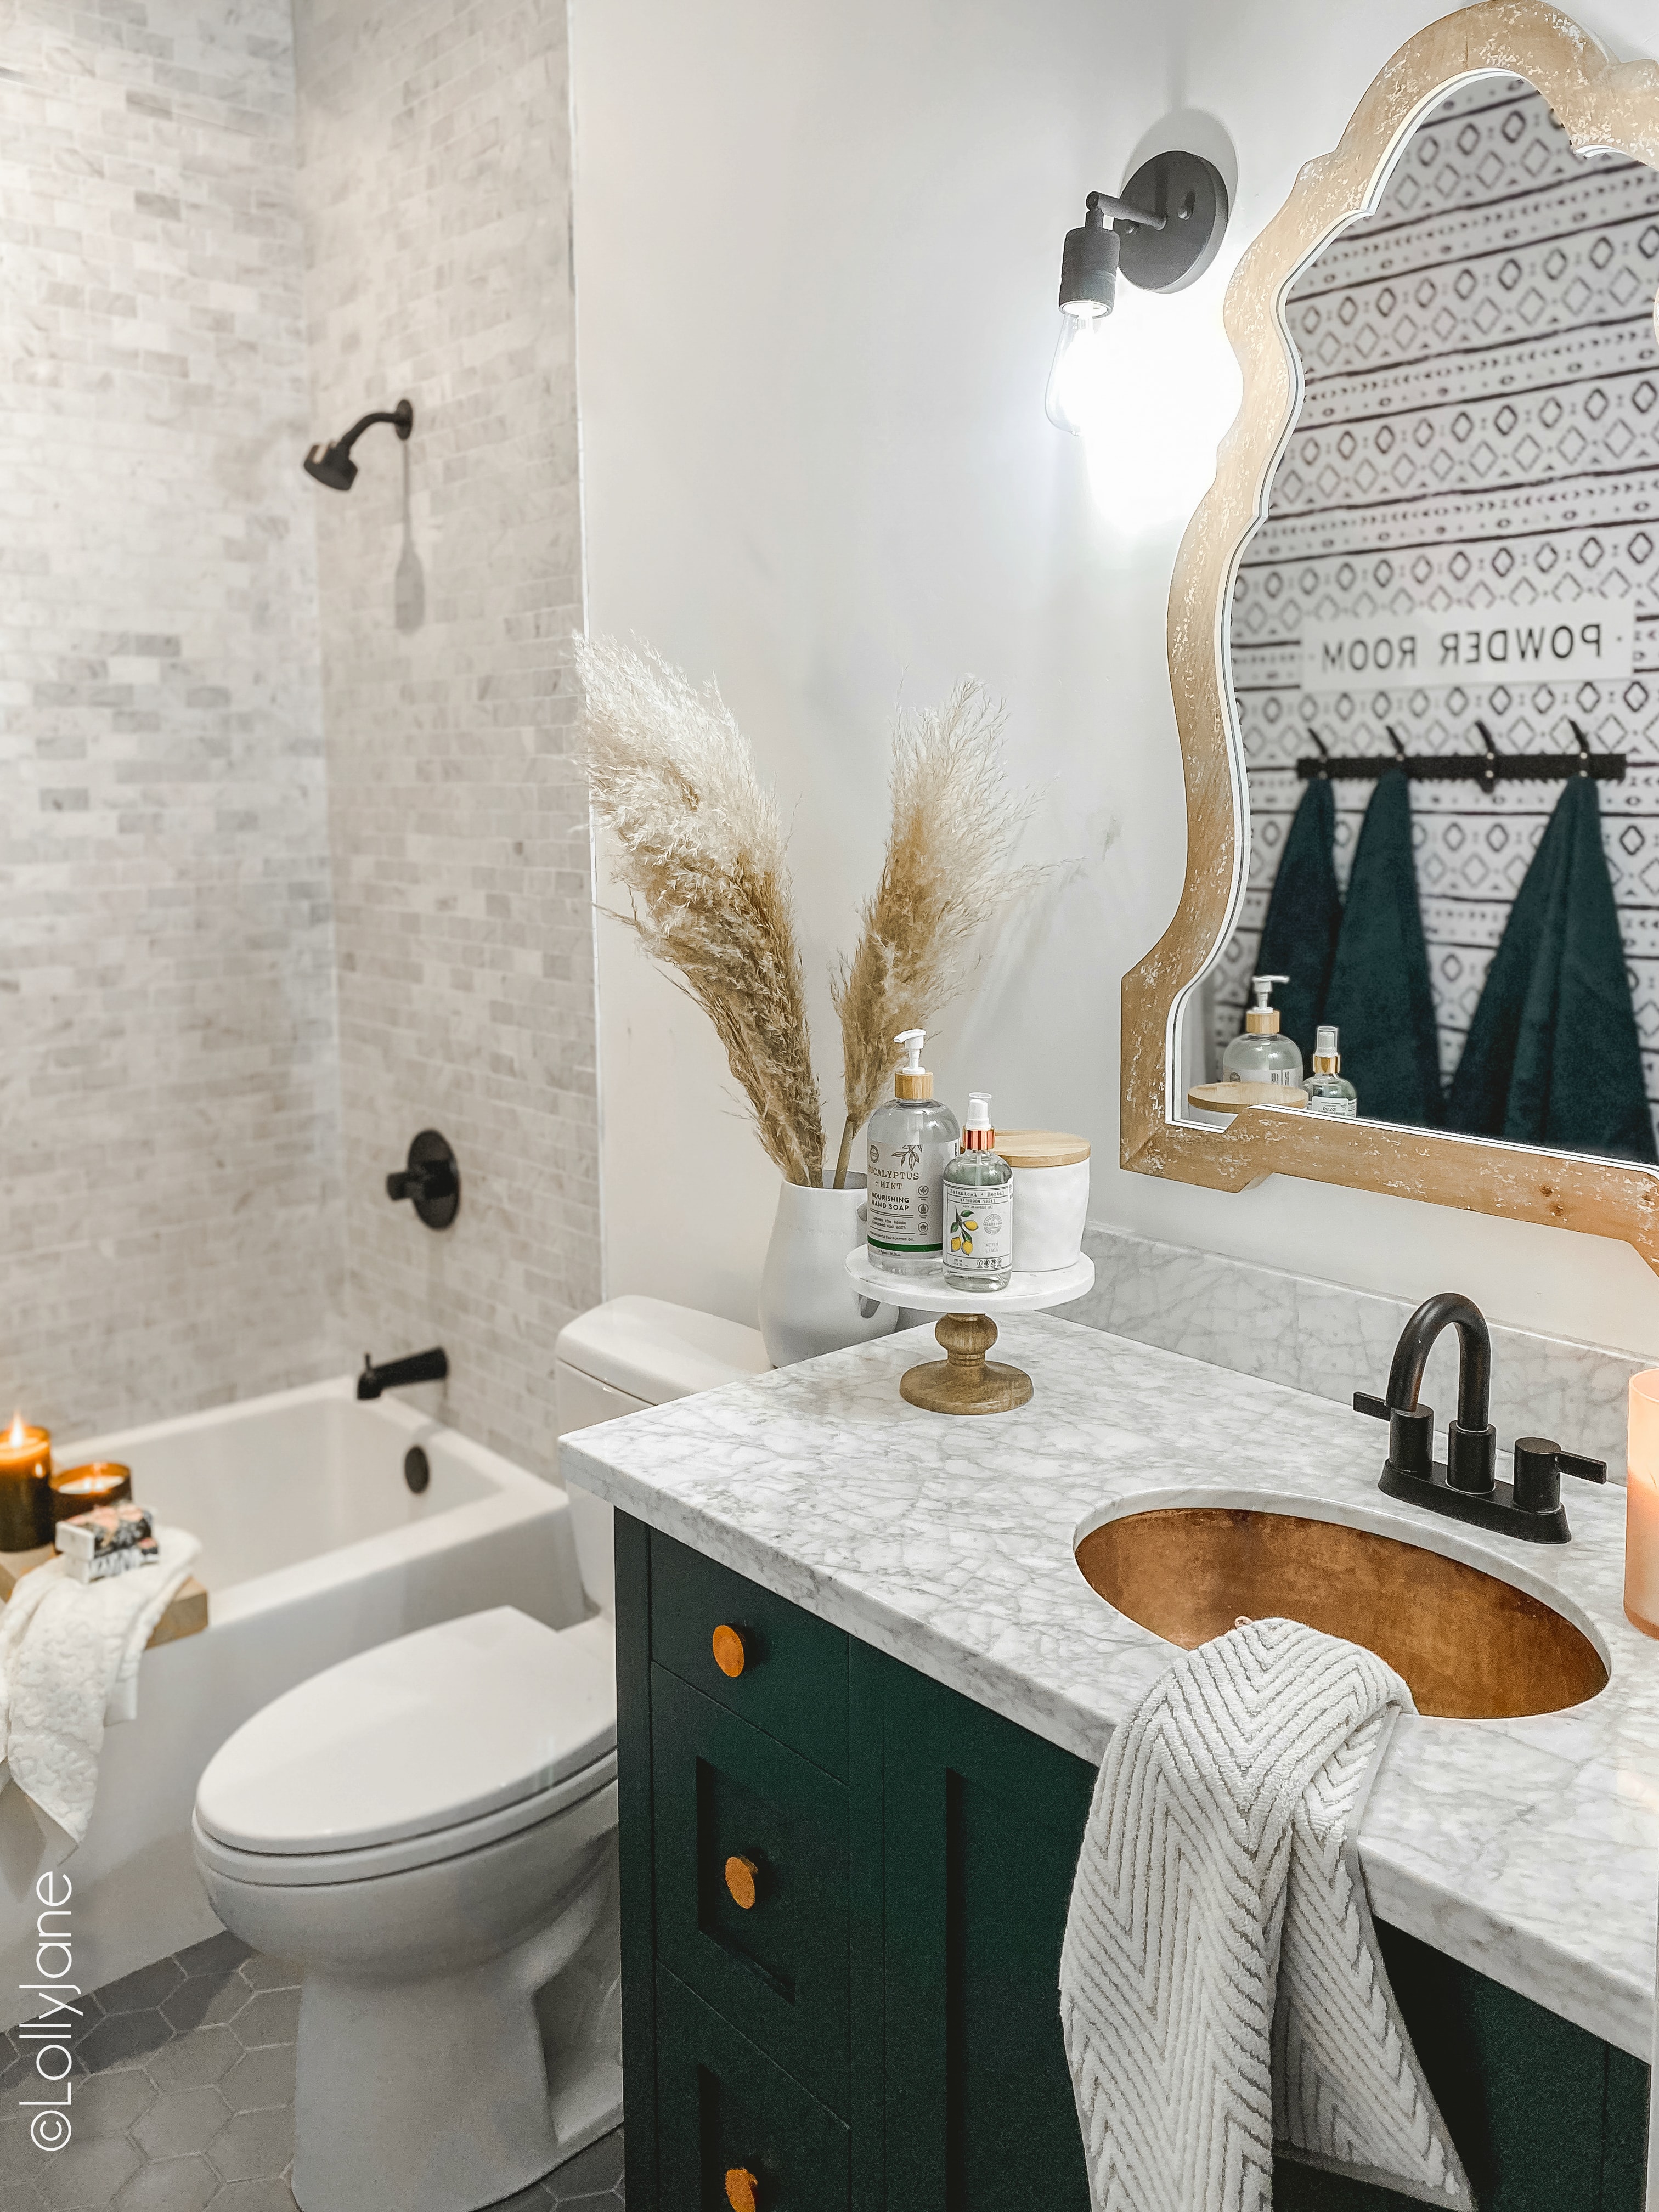 Pretty Modern Farmhouse Bathroom that had a ton of style with great storage solutions! #modernfarmhouse #modernfarmhousebathroom #marbletile #subwaytile